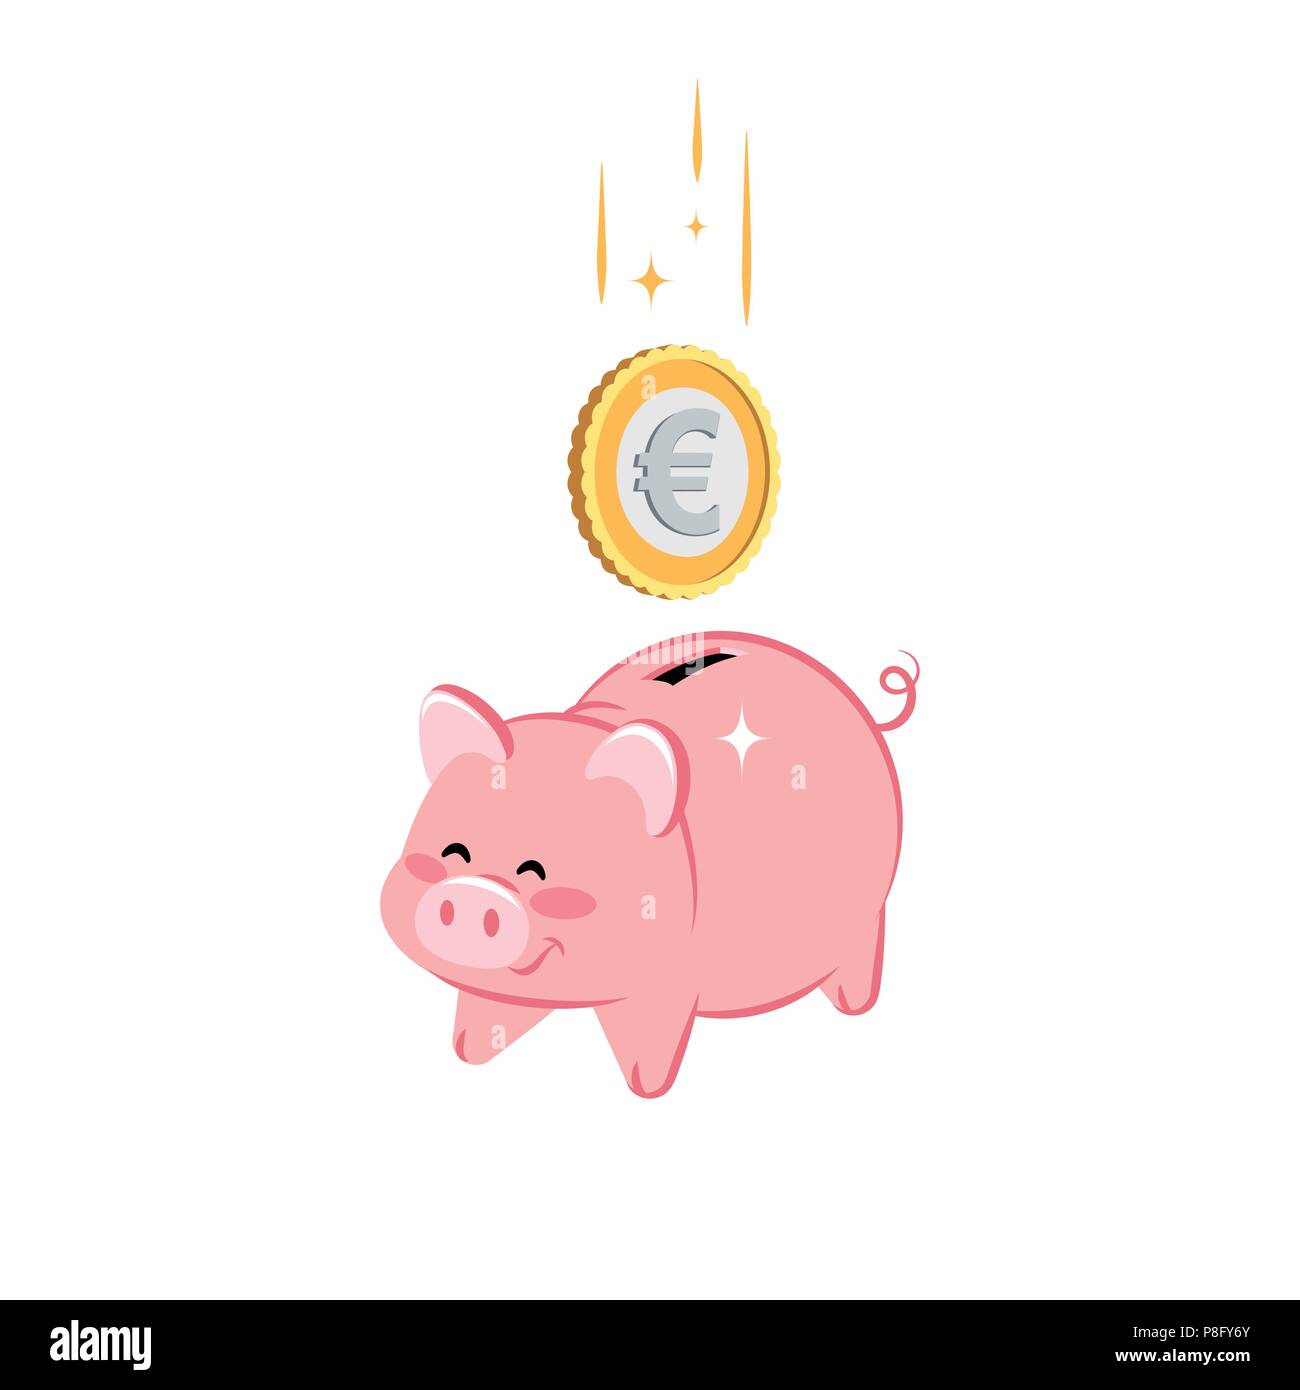 Cute Piggy Bank with falling golden coin of Euro. Concept of saving money, investment, banking. Flat design. Vector illustration. Stock Vector